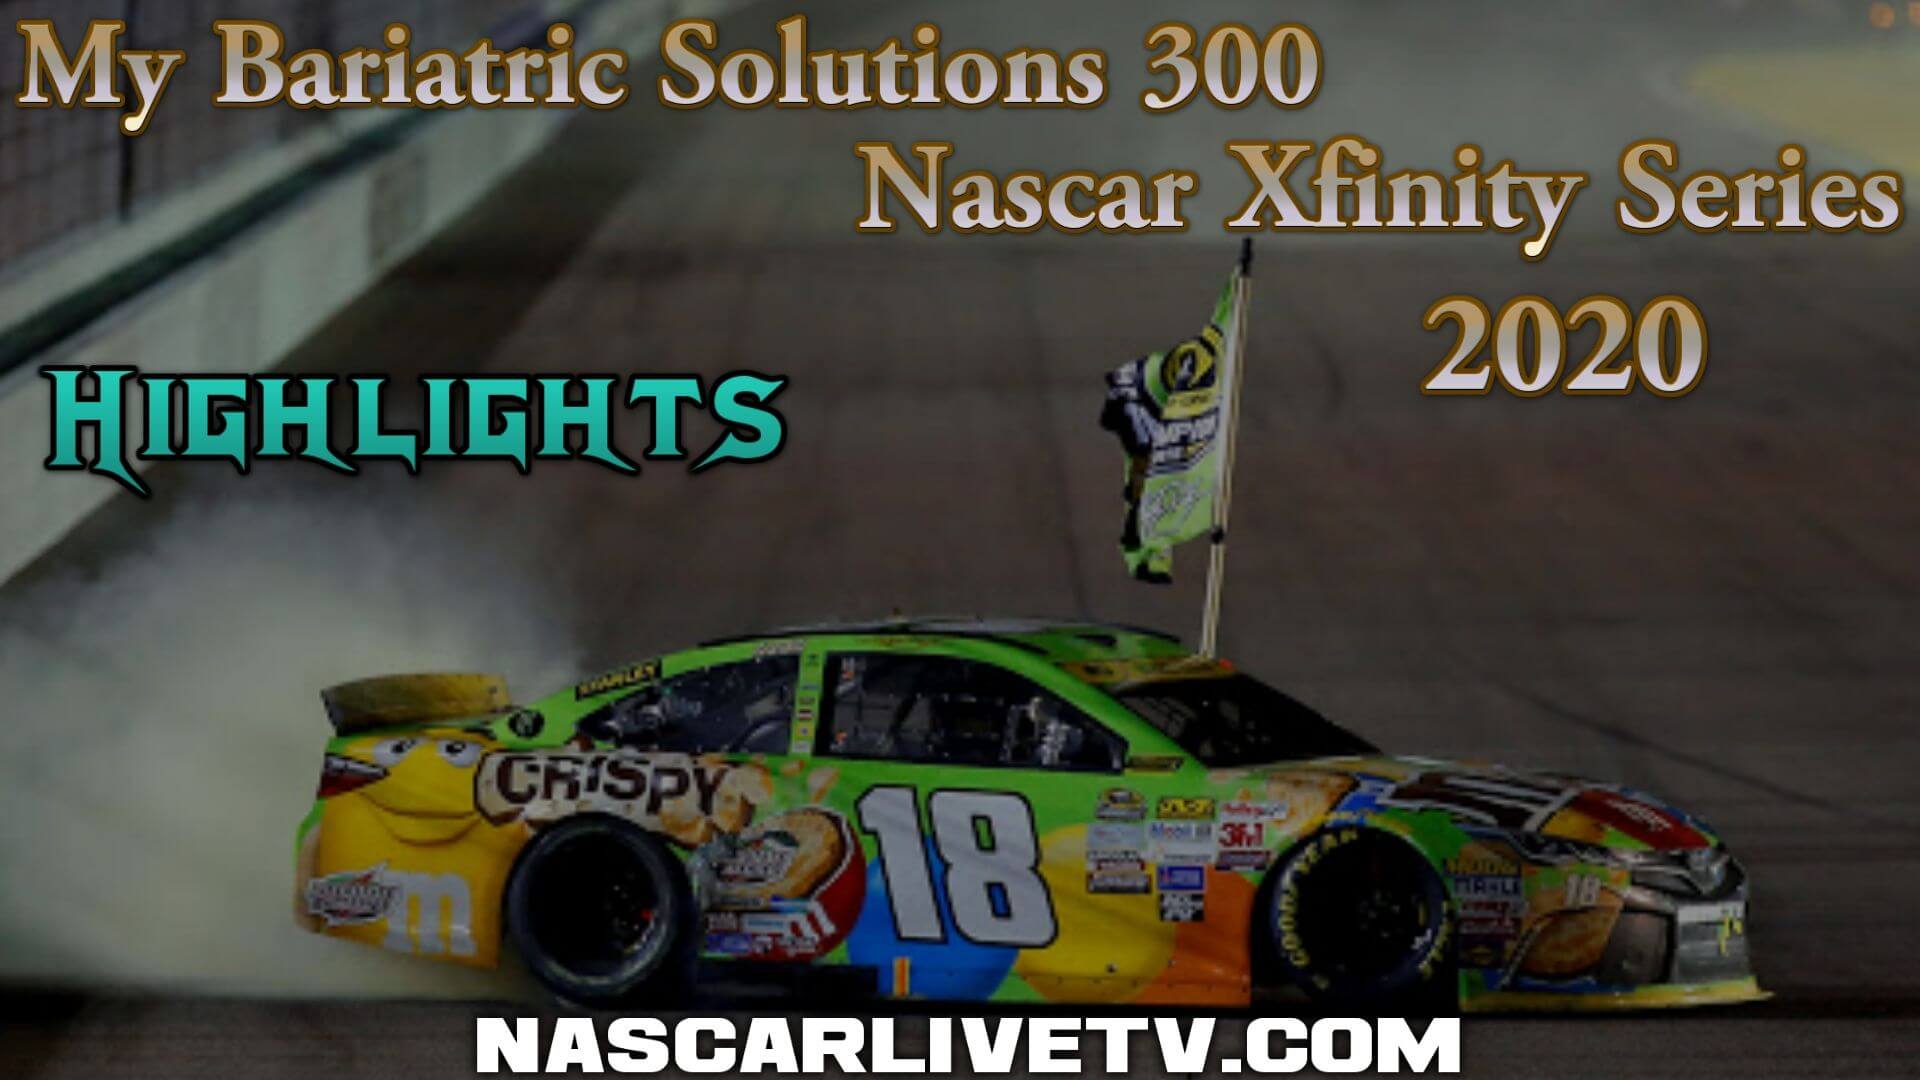 My Bariatric Solutions 300 Xfinity Series 2020 Highlights